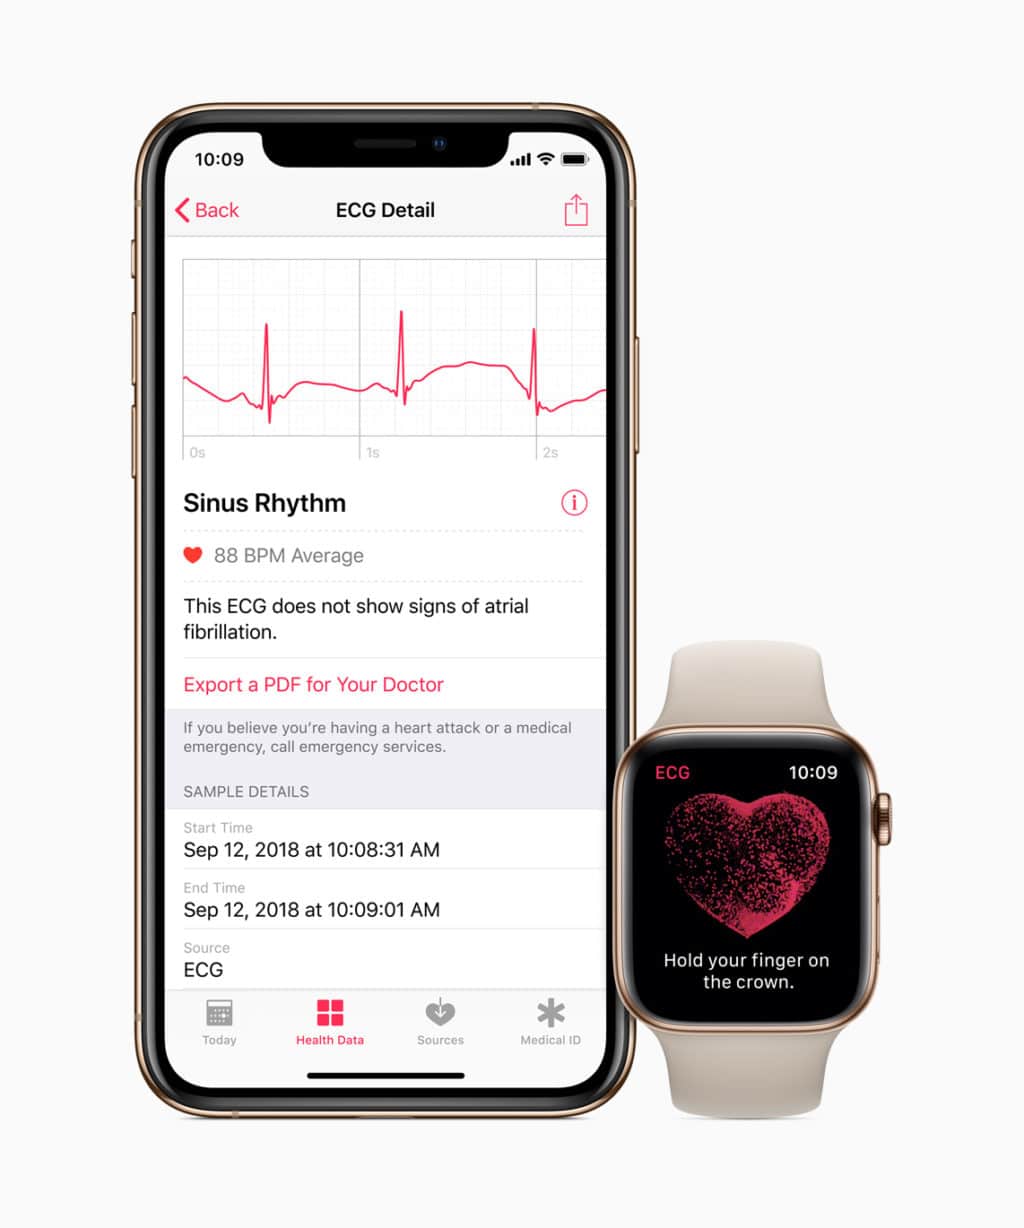 Apple-Watch-Series-4-Heart-Rate-Notifications-with-iPhone.jpg?fit=1024%2C1228&ssl=1